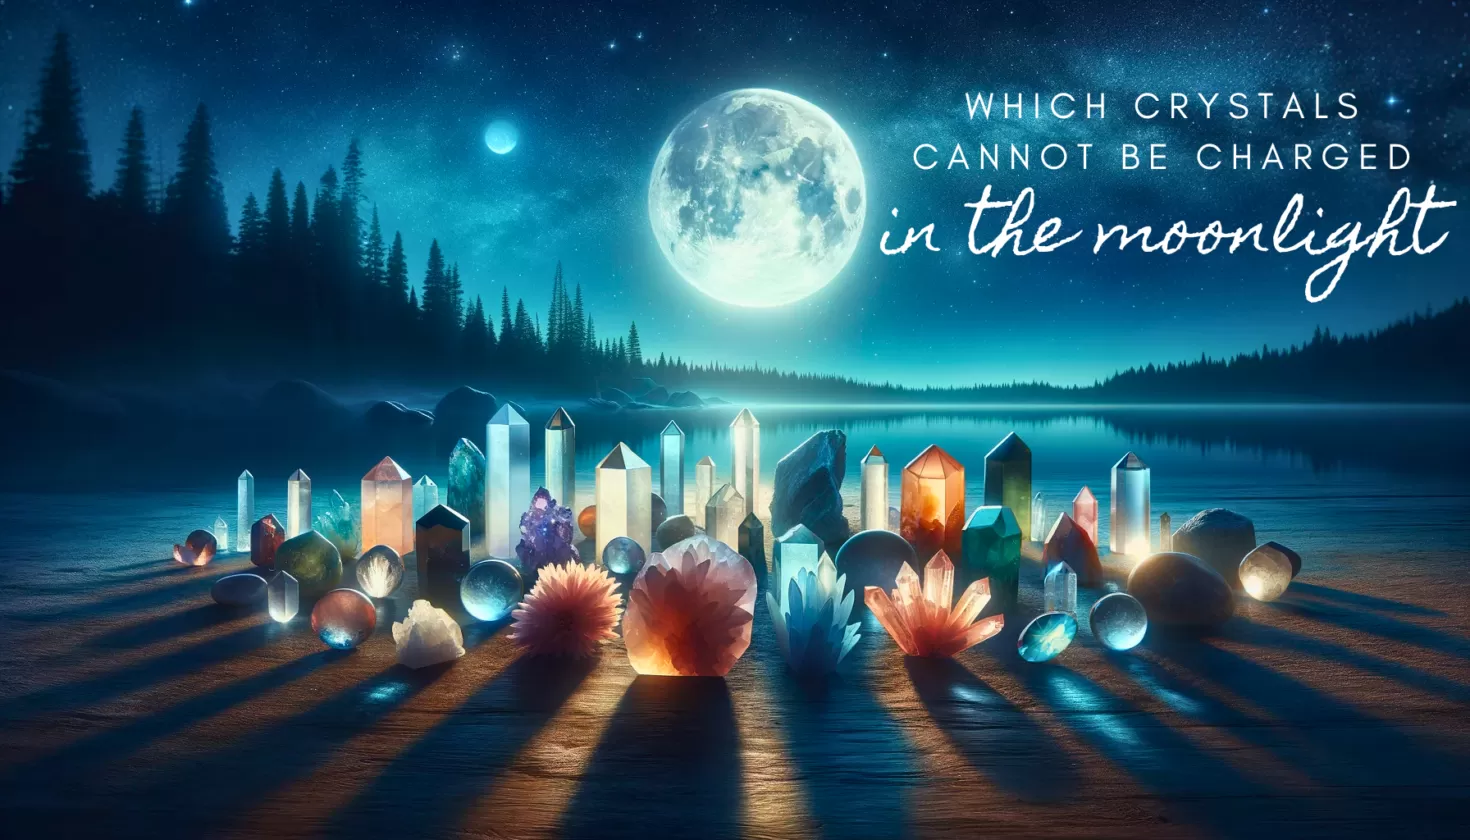 Featured image for which crystals cannot be charged in the moonlight. Aesthetic pleasing image of the moon and crystals.